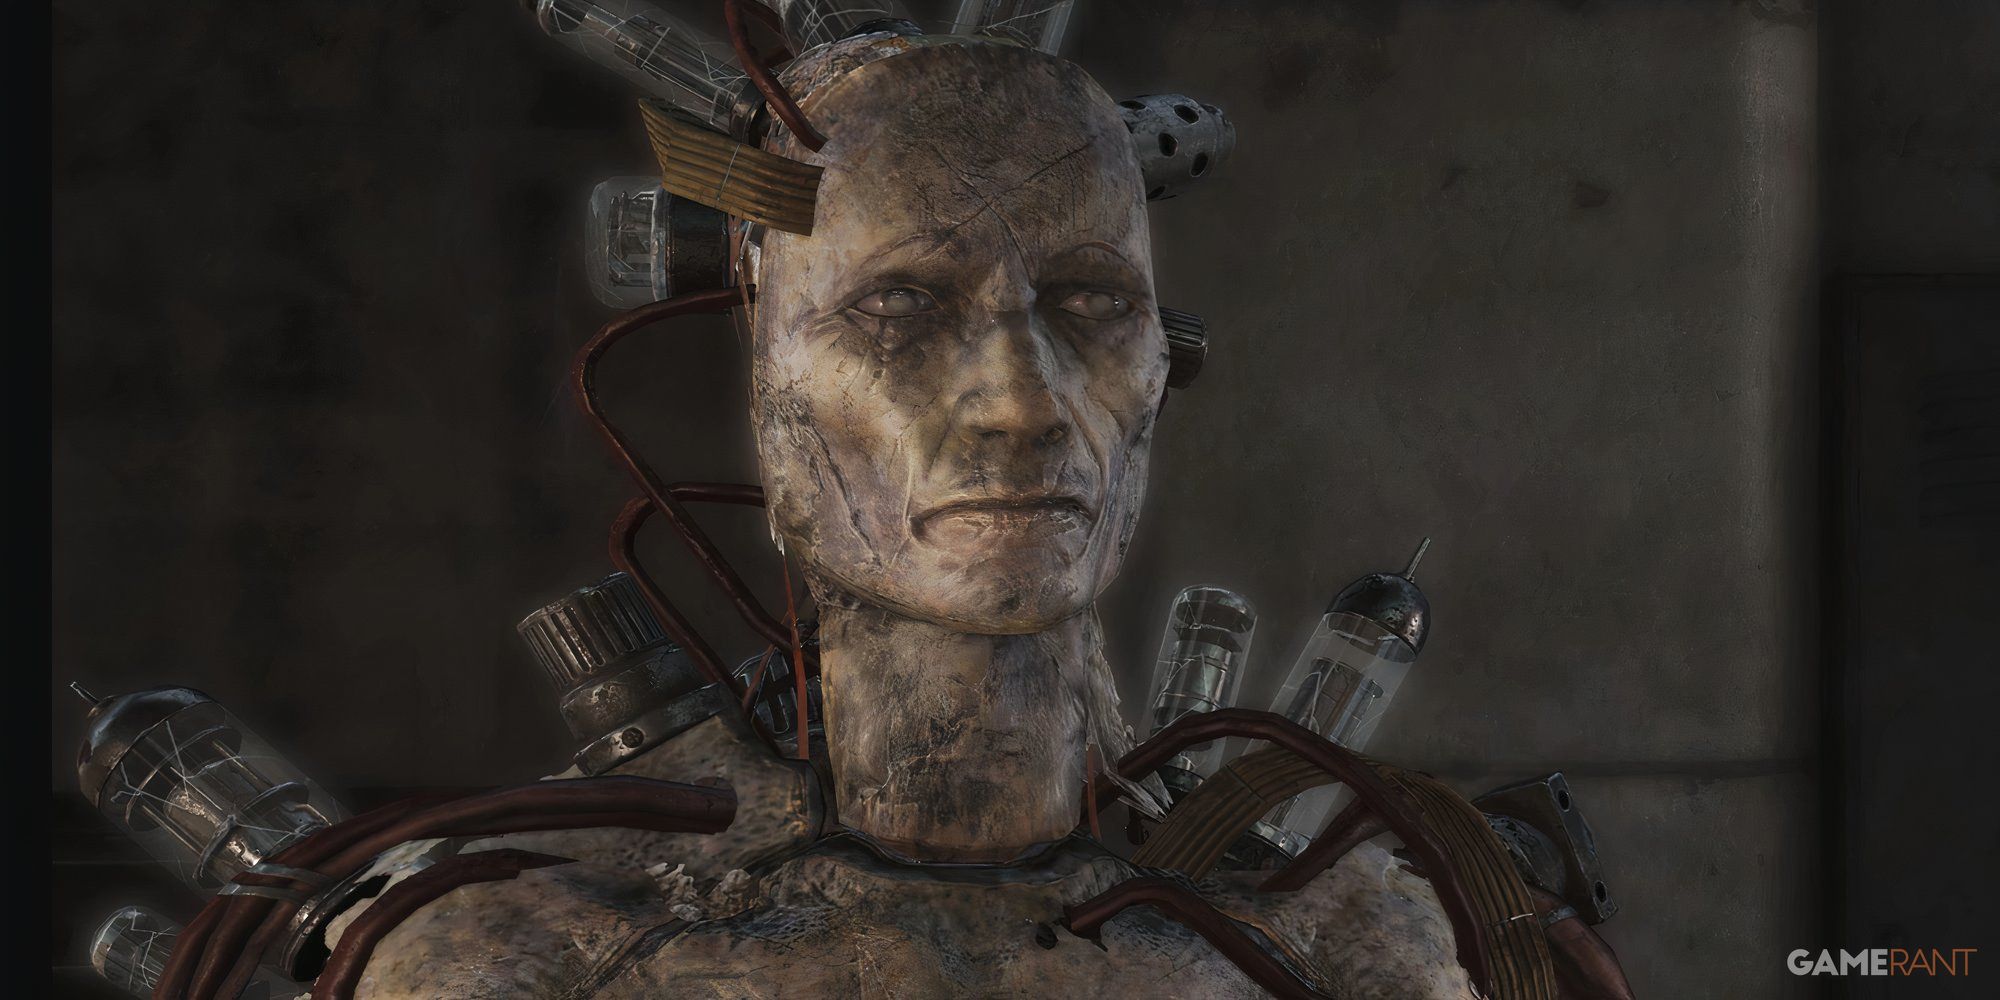 DiMA the synth from the Far Harbor DLC